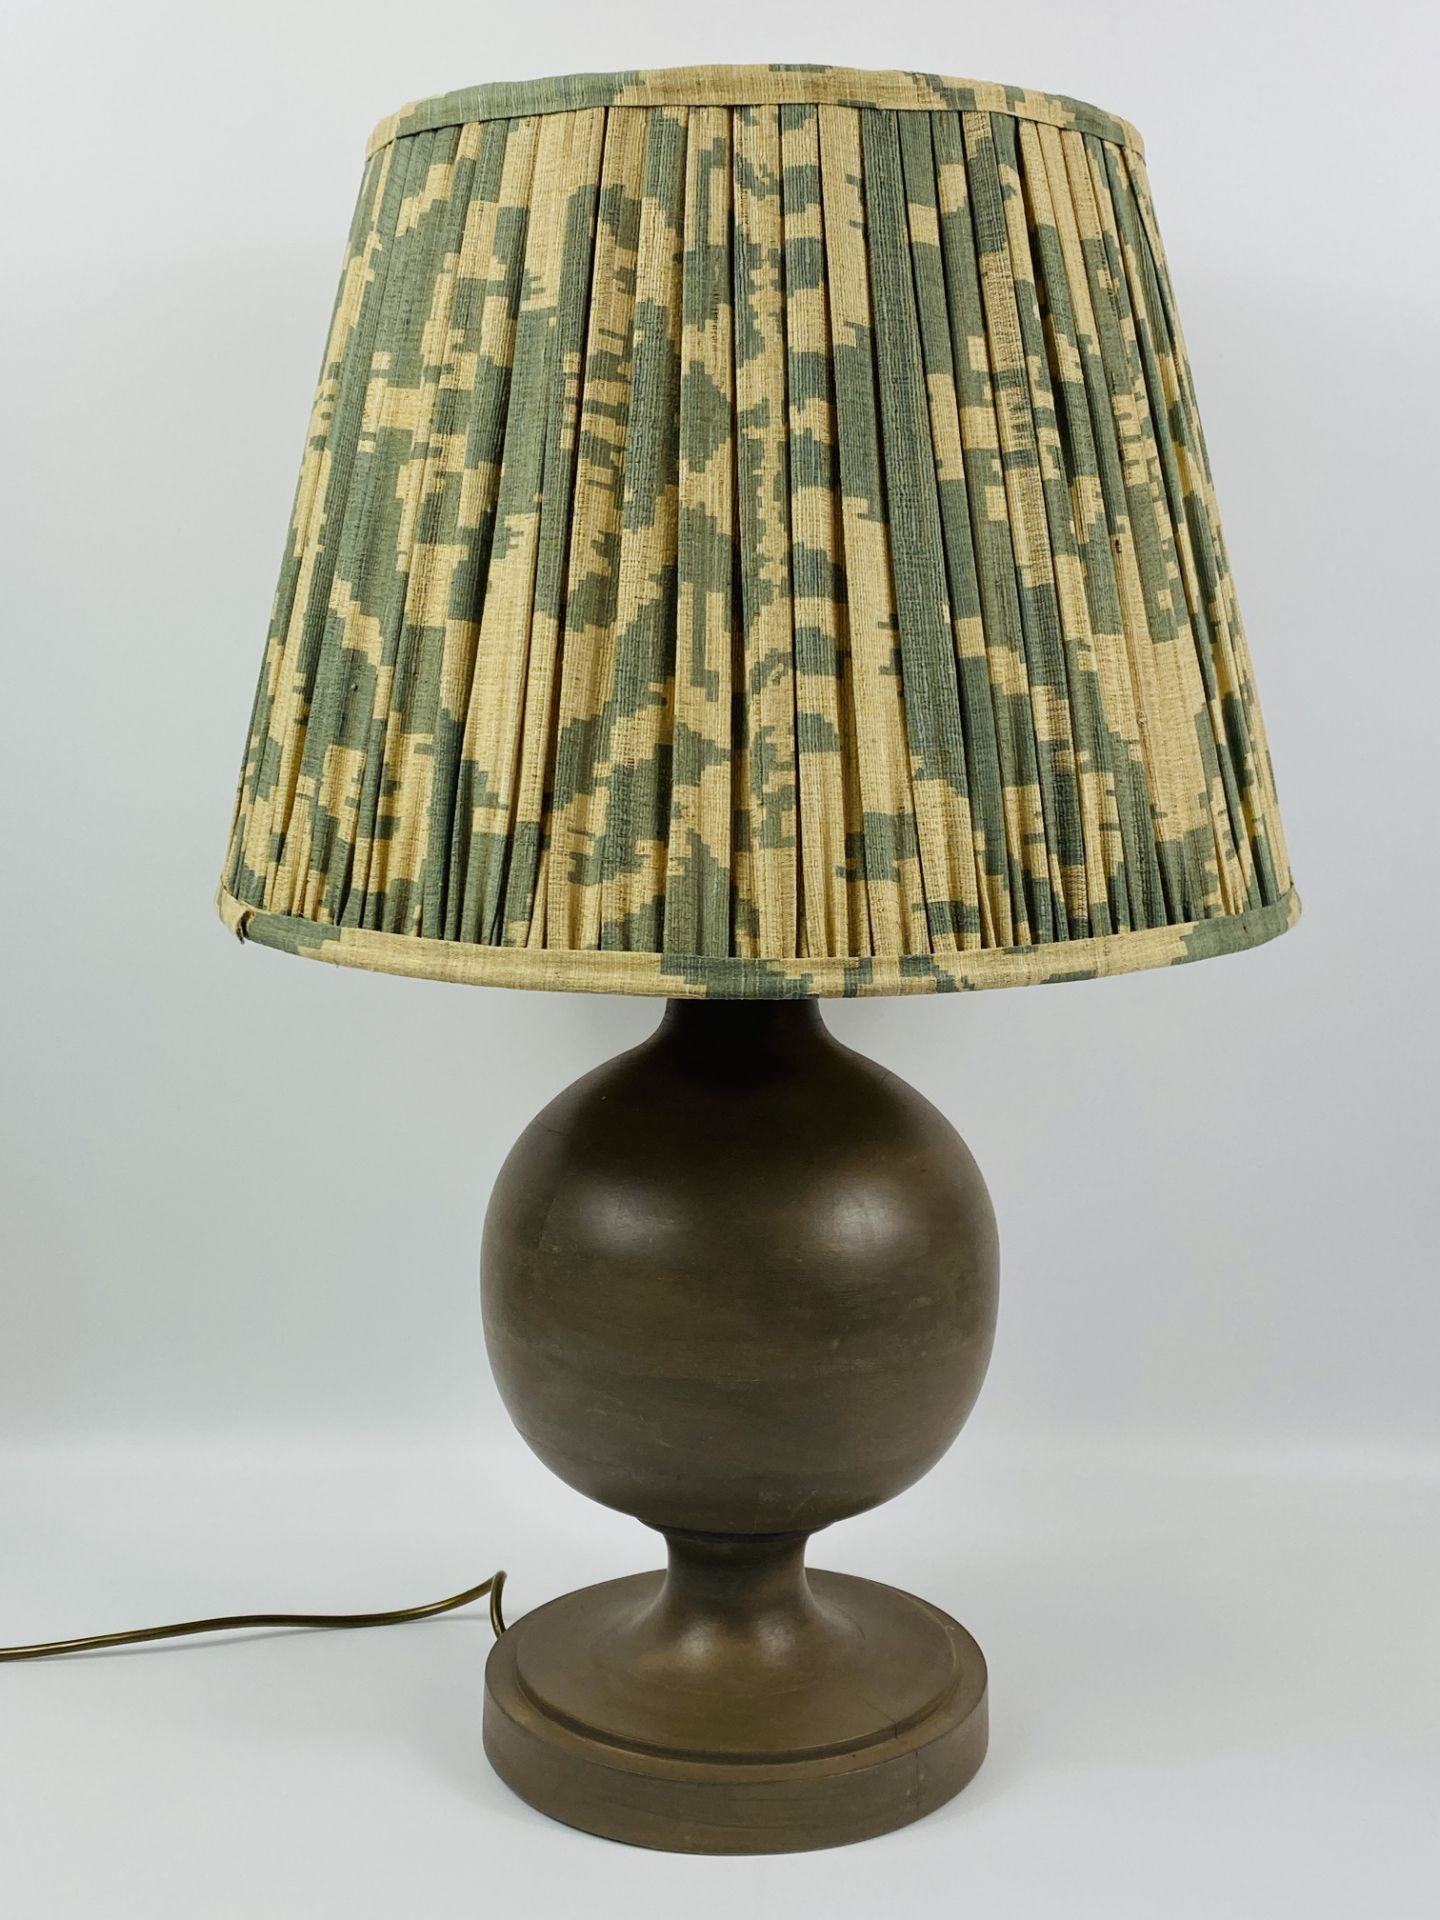 Pair of ceramic table lamps - Image 2 of 5